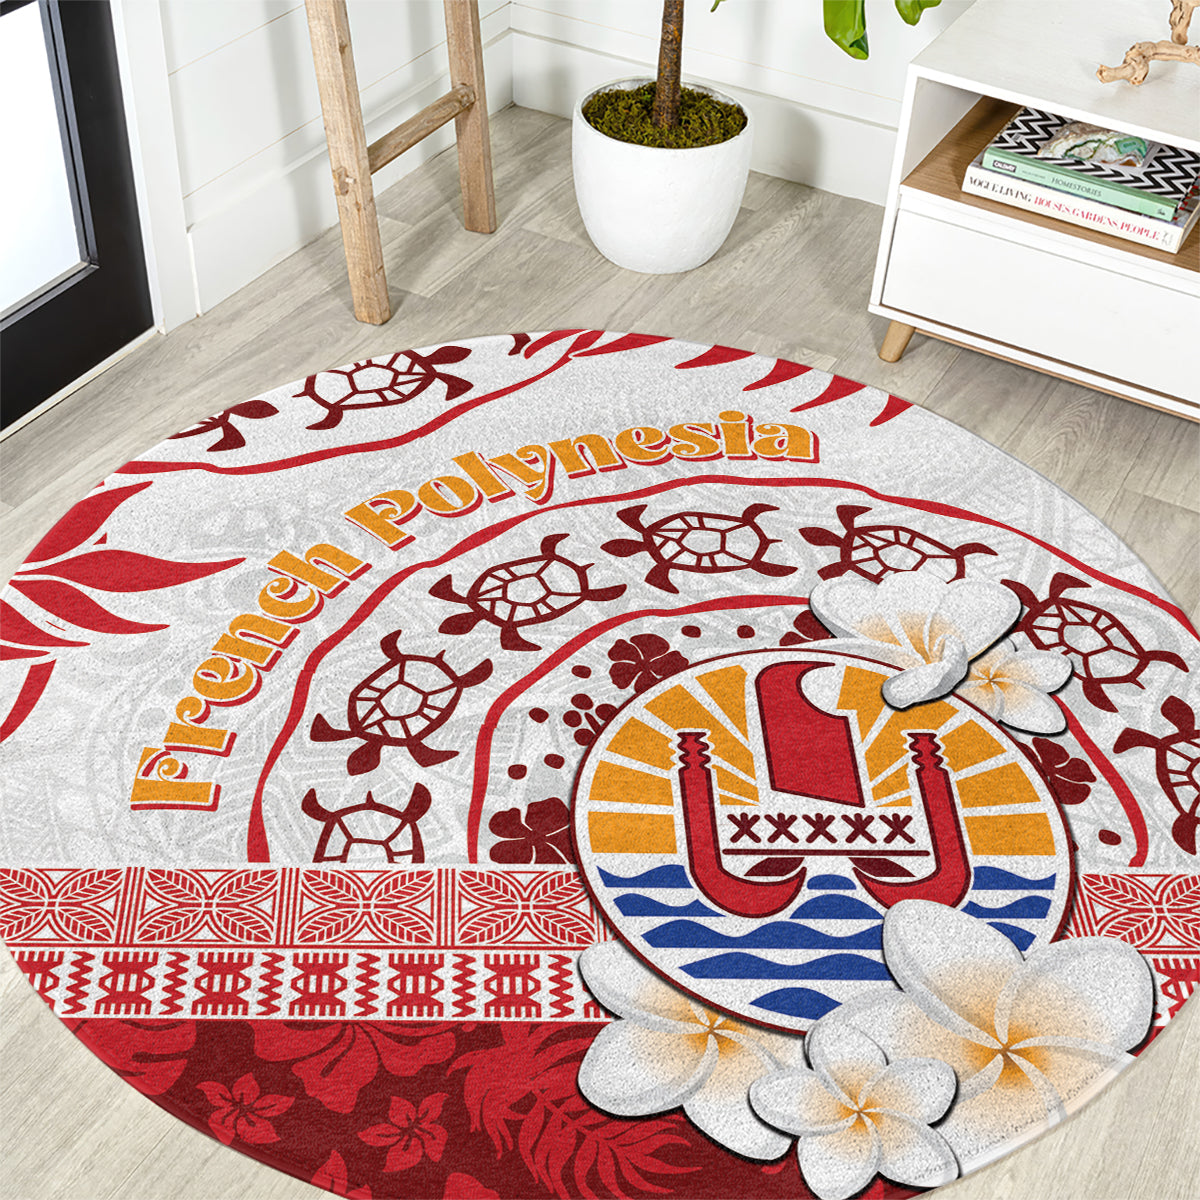 French Polynesia Internal Autonomy Day Round Carpet Tropical Hibiscus And Turtle Pattern